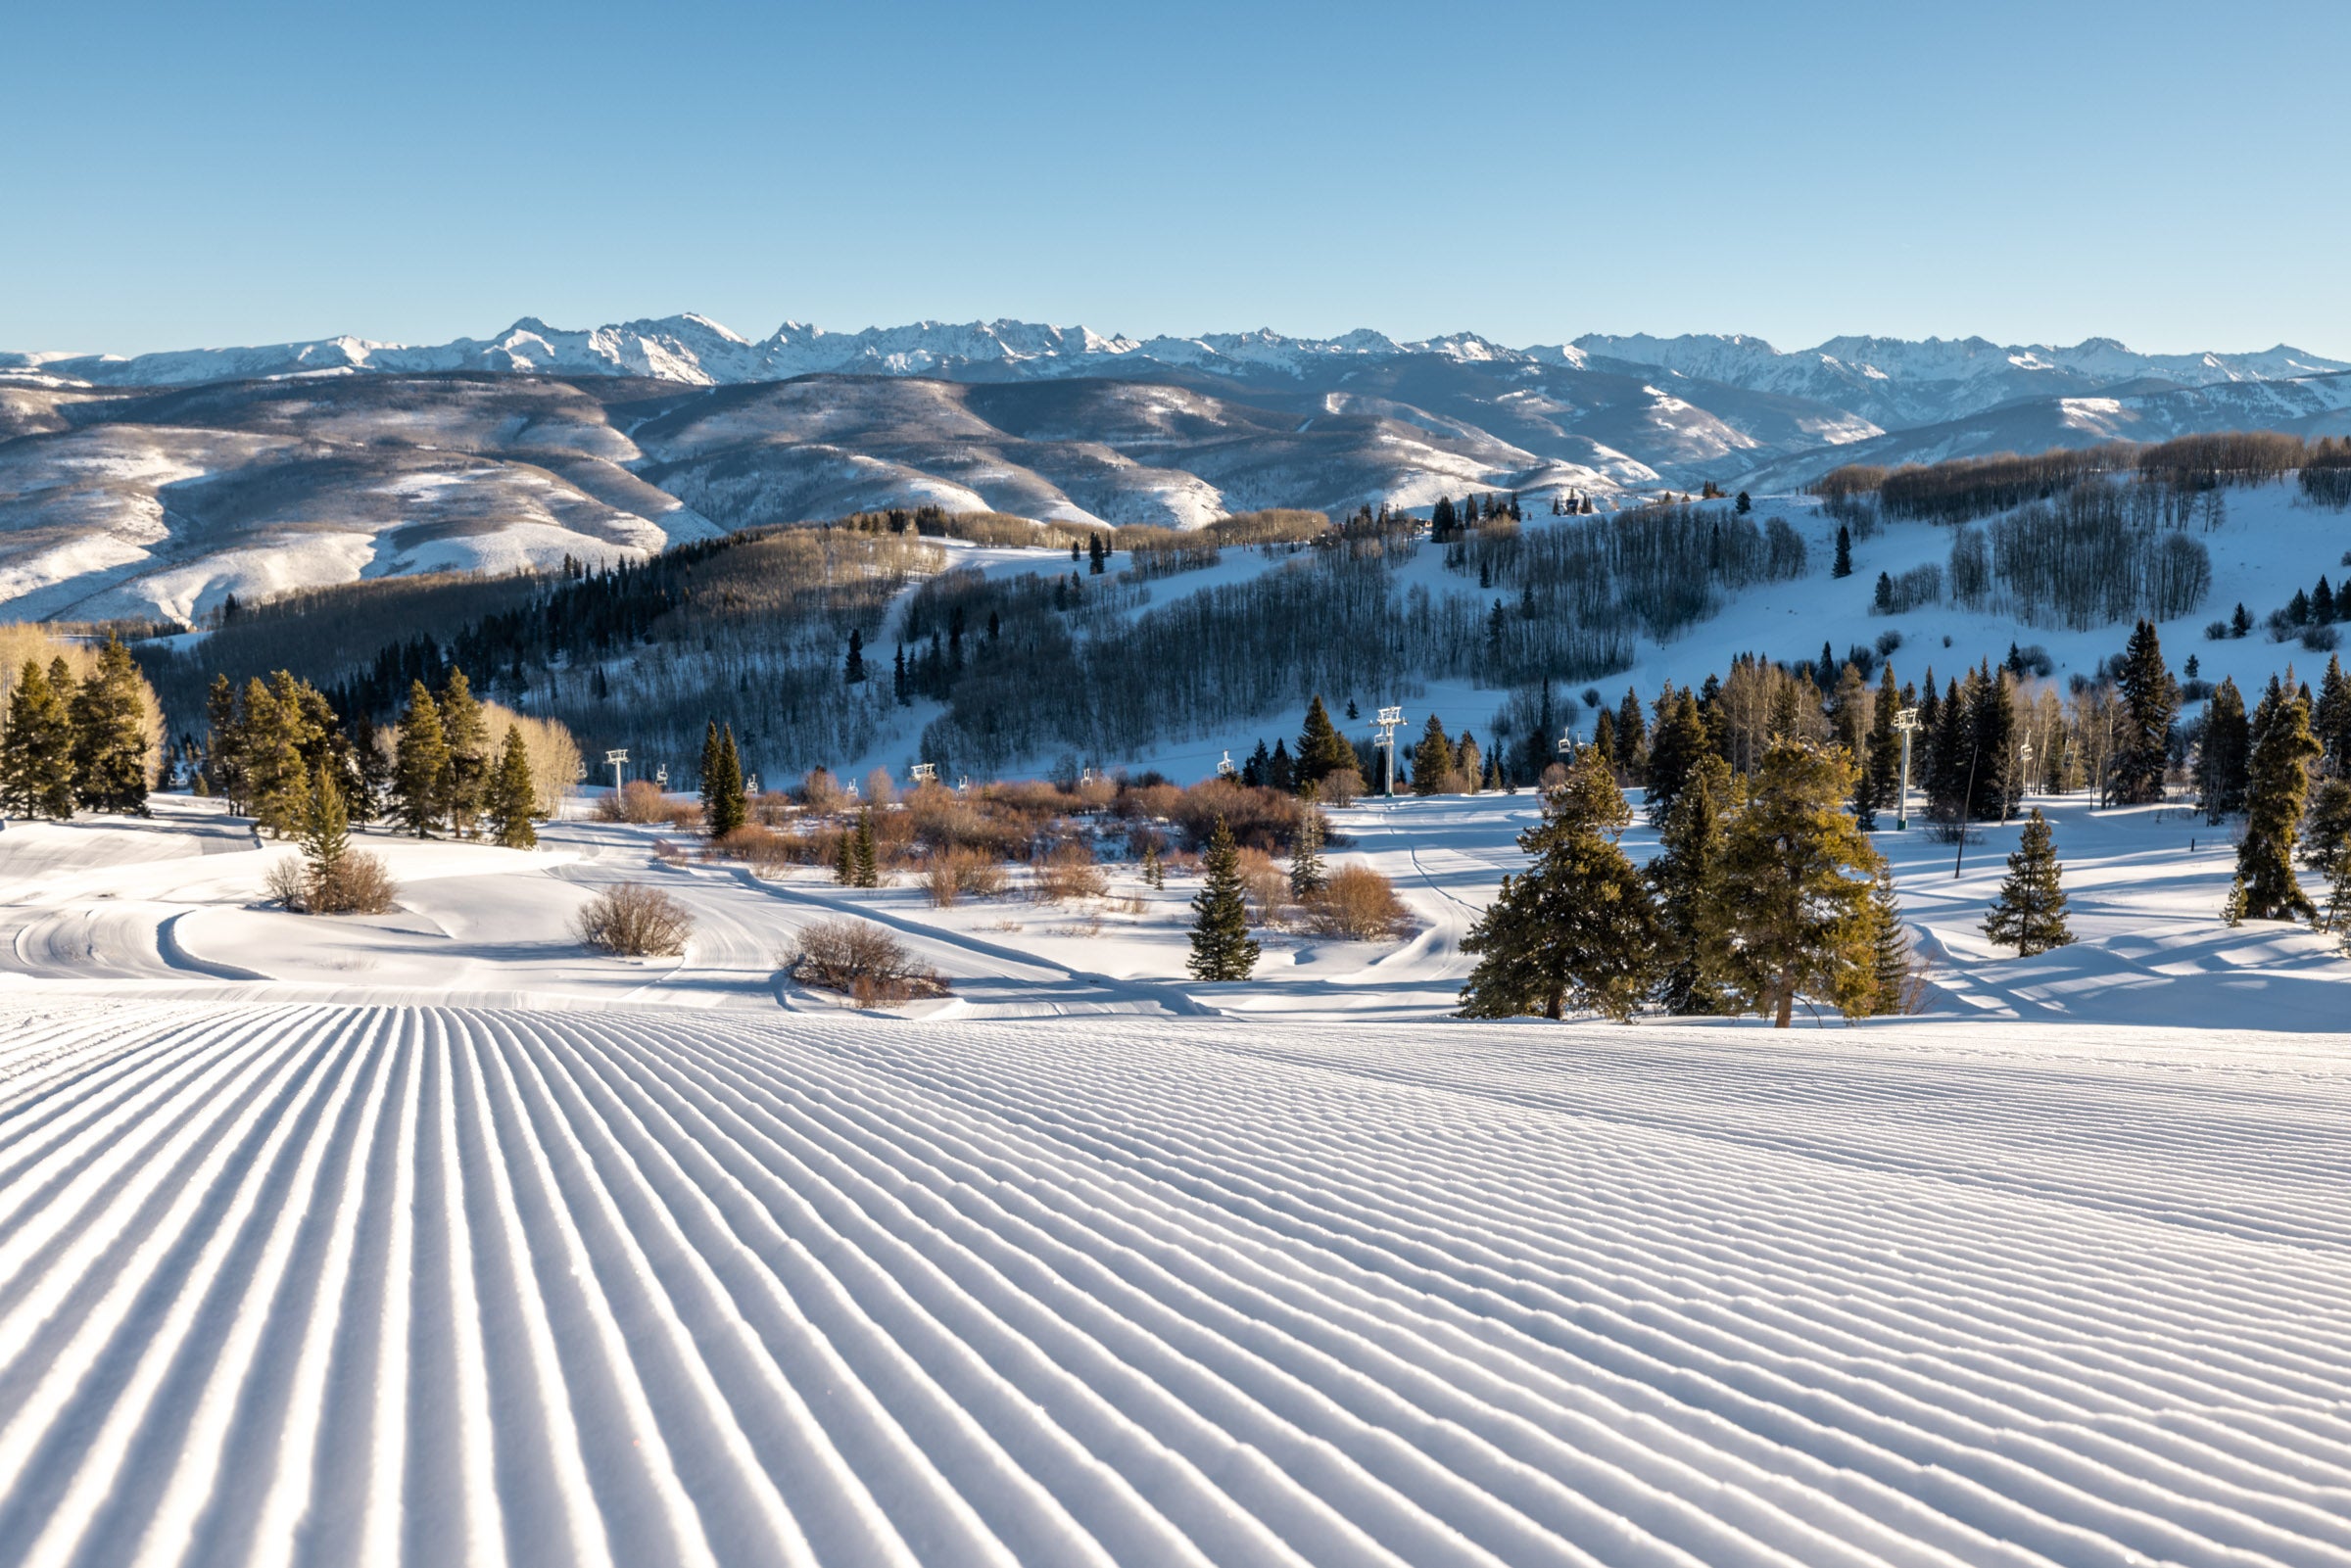 Discover the Epic Ski Experience from Beaver Creek to Vail